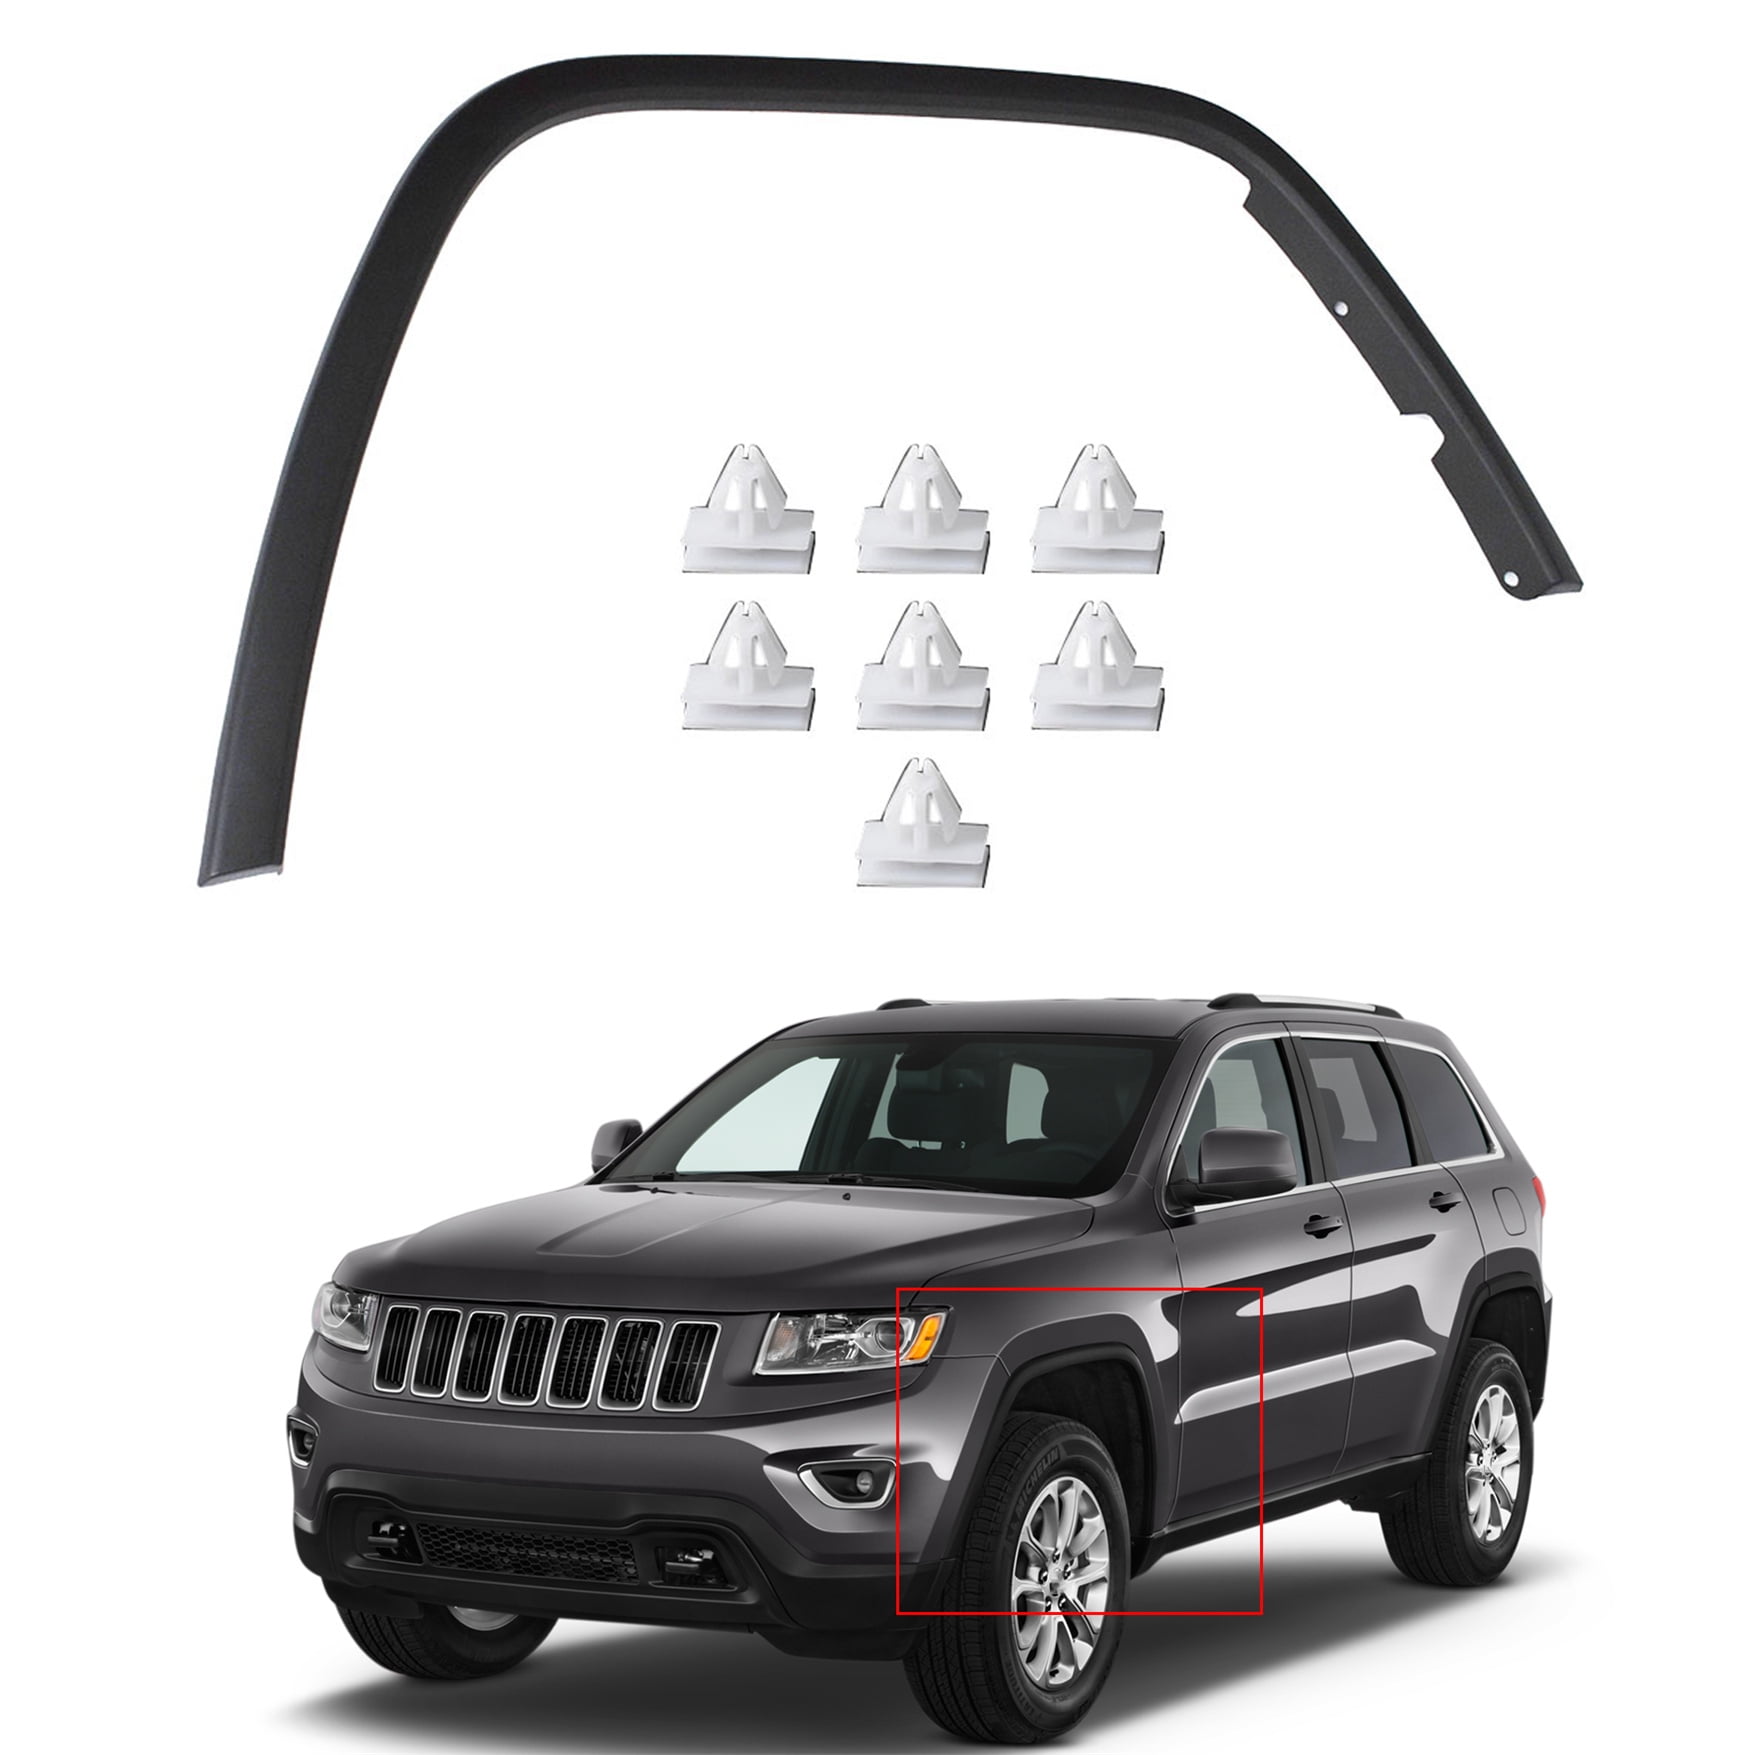 NEW Fender Flares Set Compatible with 2011-2016 Grand Cherokee Front Black Plastic 2Pc 